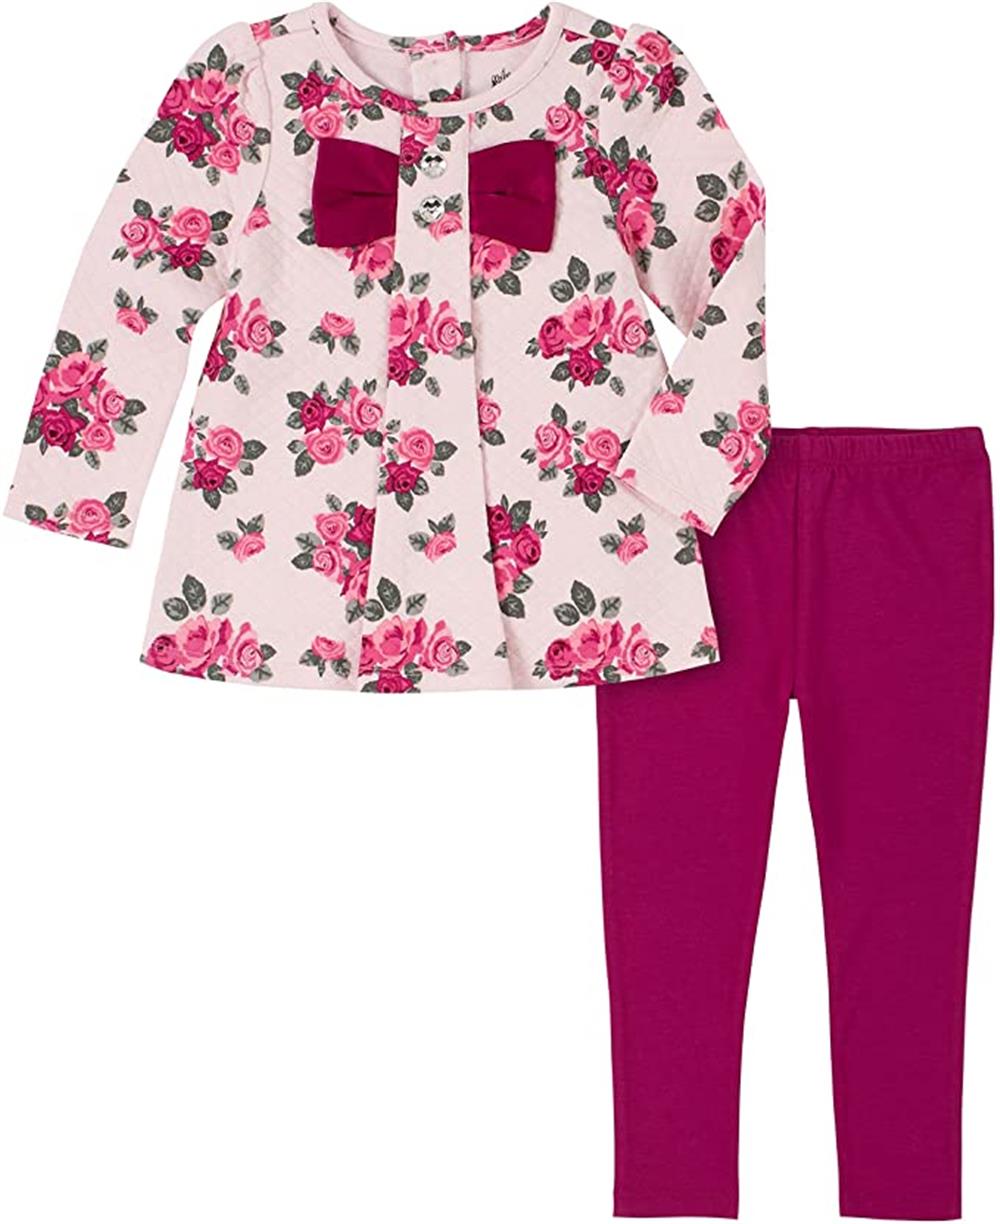 Kids Headquarters Girls Quilted Floral Bow Tunic Legging Set